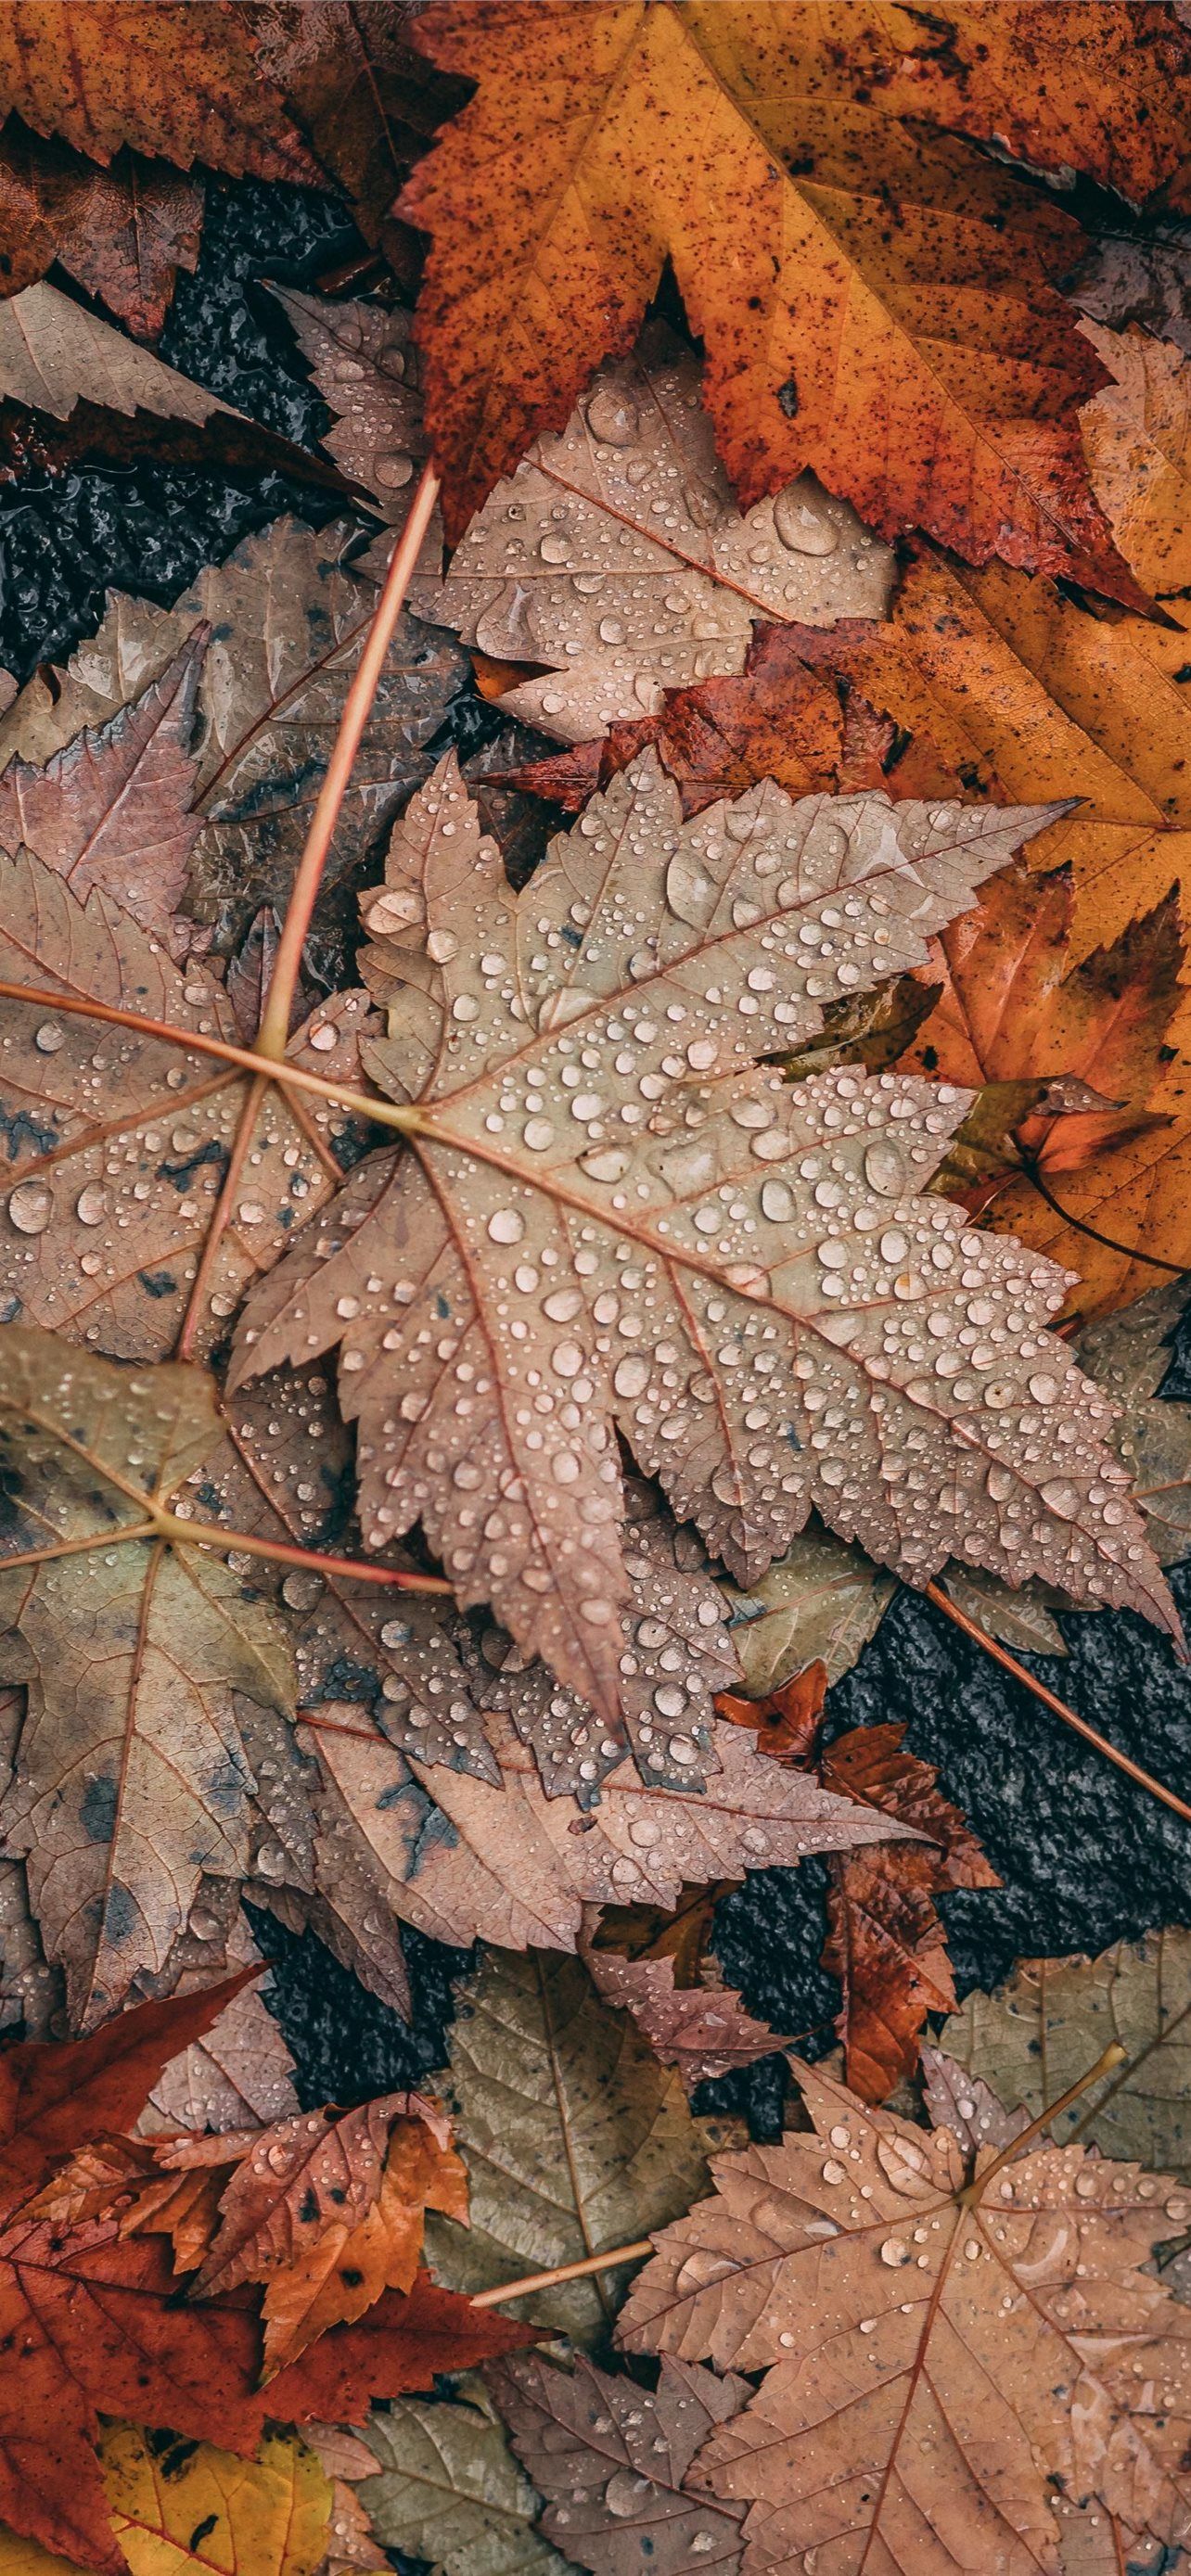 A close up of a pile of autumn leaves with water droplets on them - Fall, leaves, fall iPhone